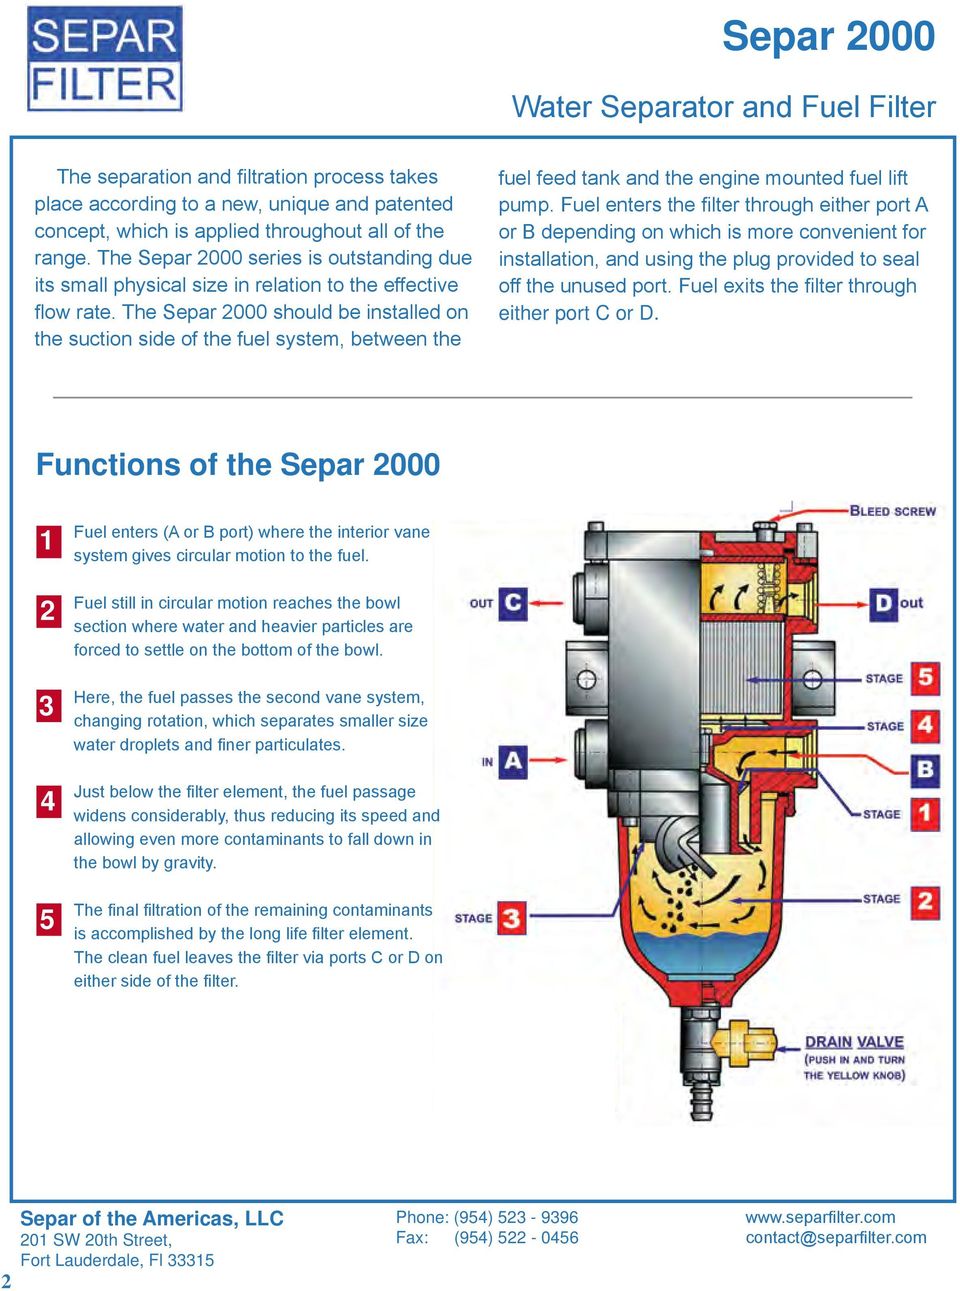 The Separ 000 should be installed on the suction side of the fuel system, between the fuel feed tank and the engine mounted fuel lift pump.